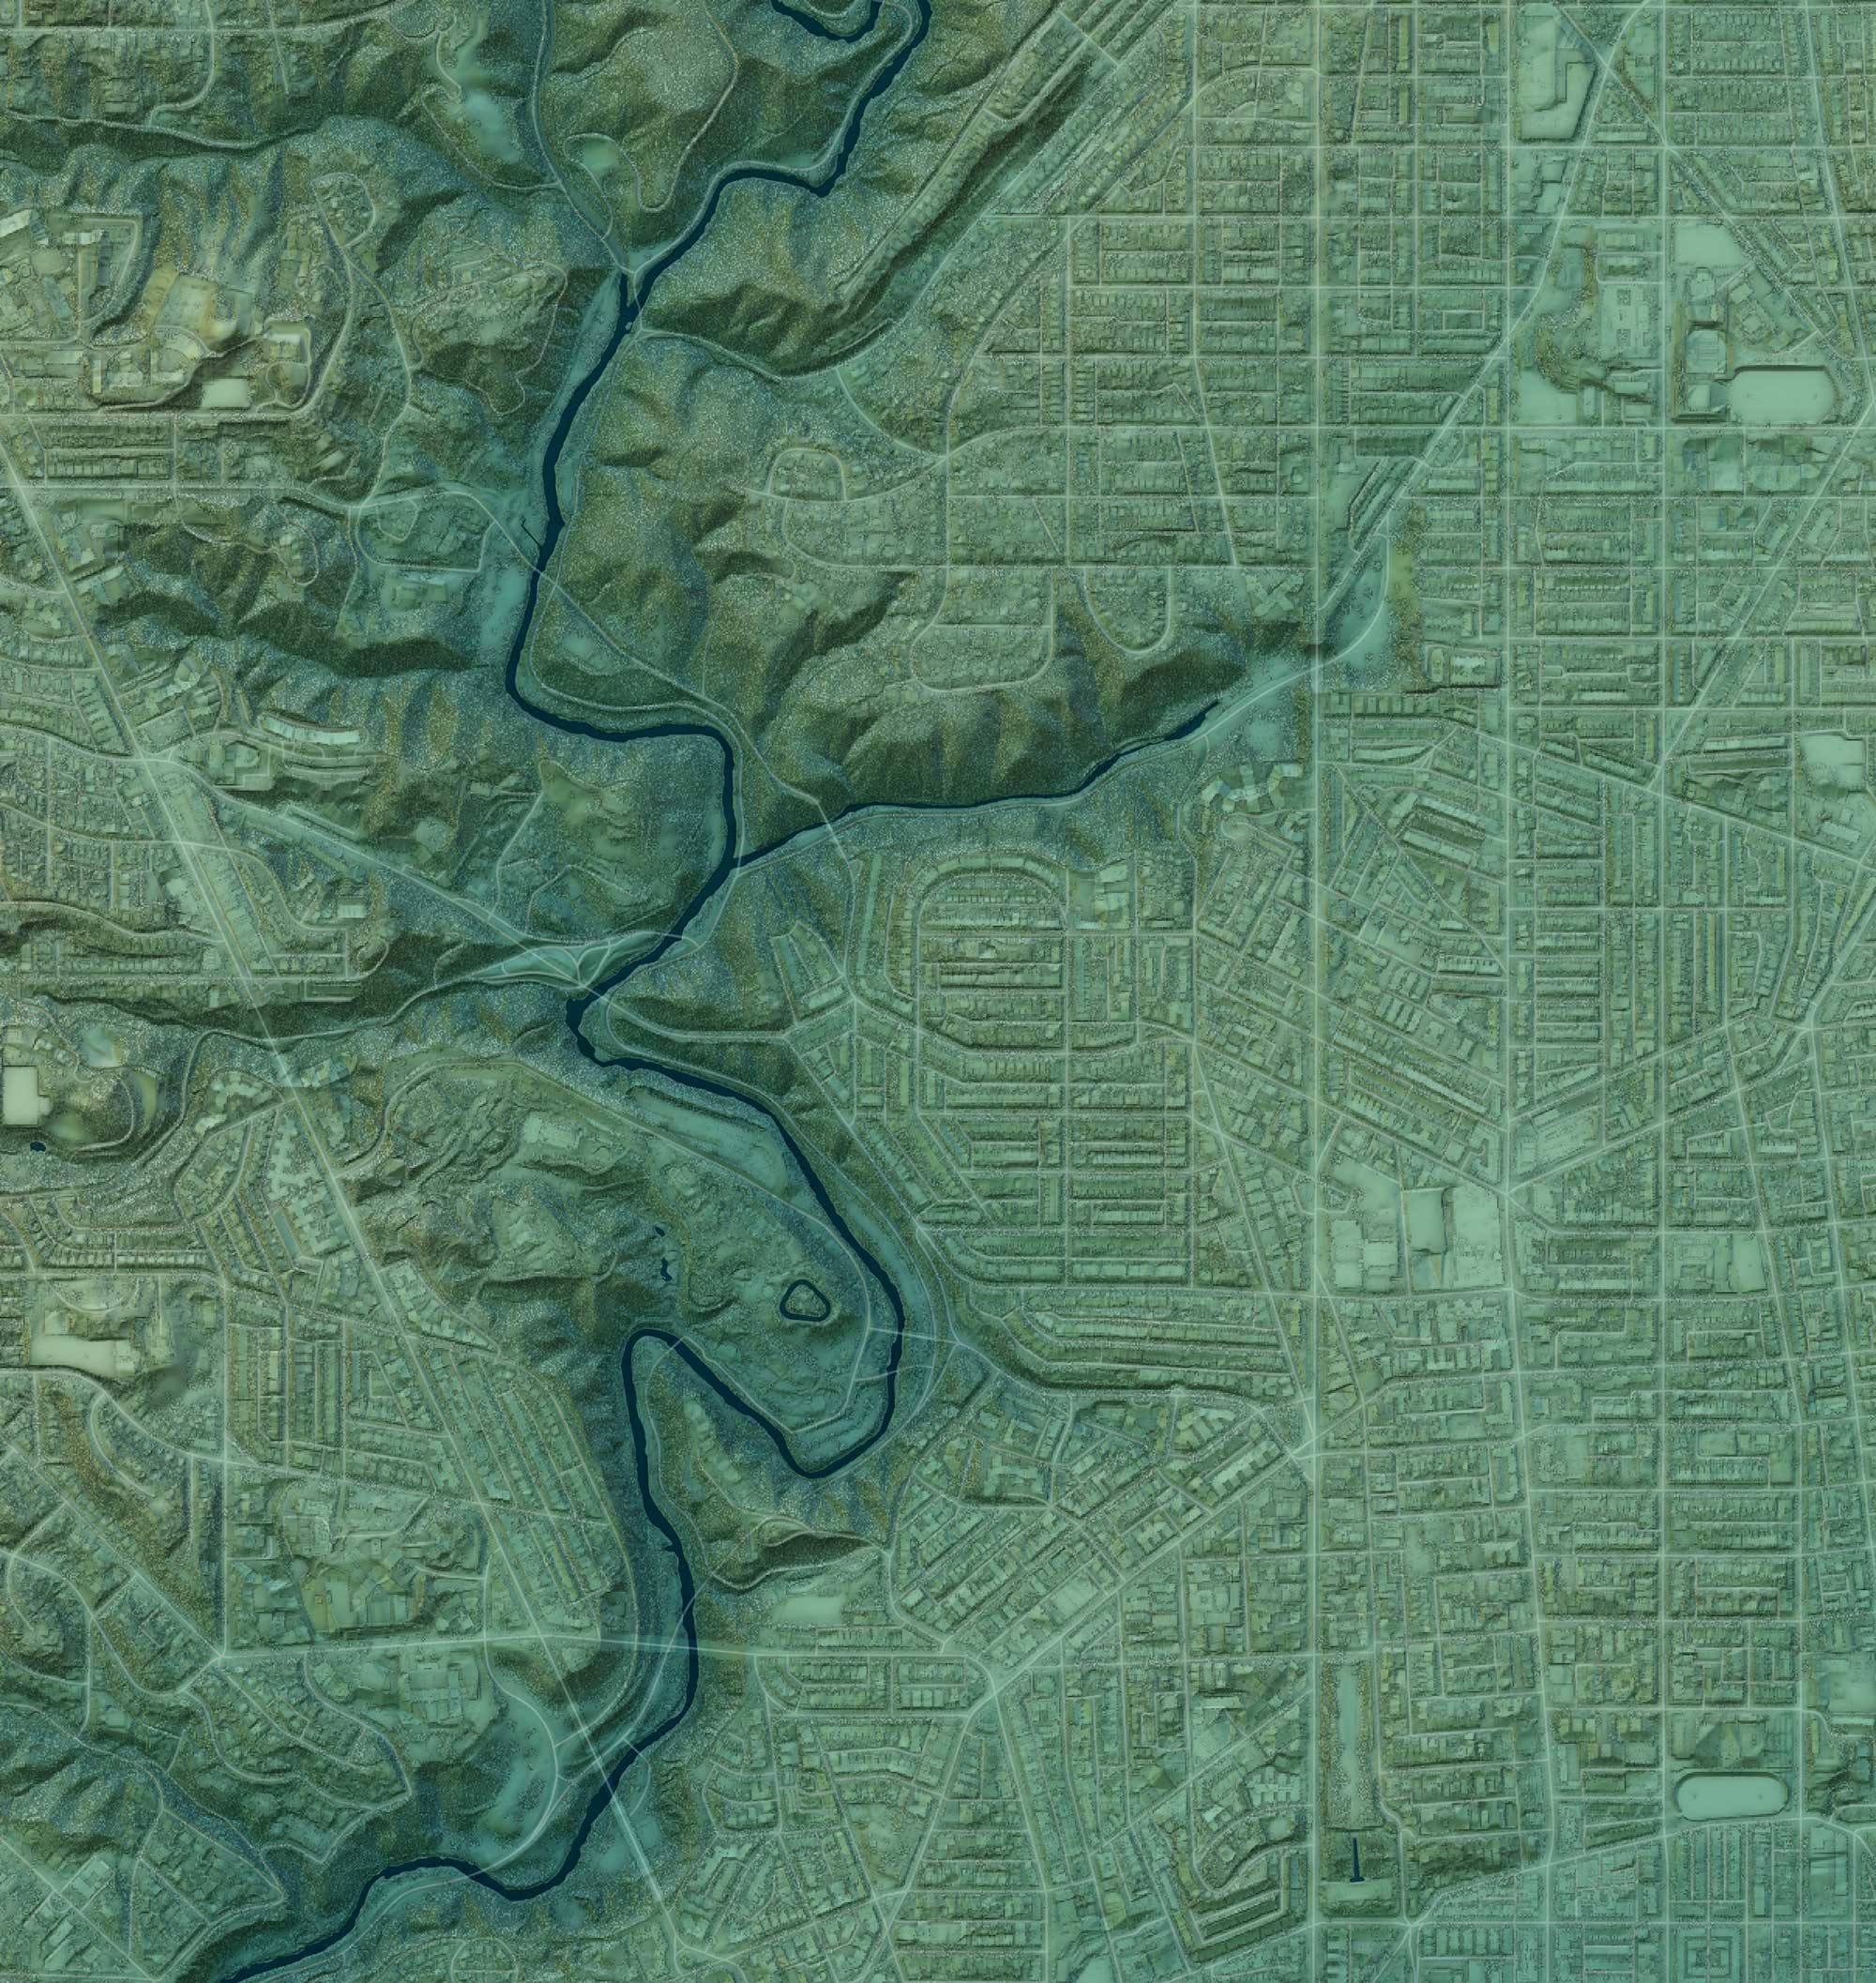 shaded relief map of Rock Creek Park